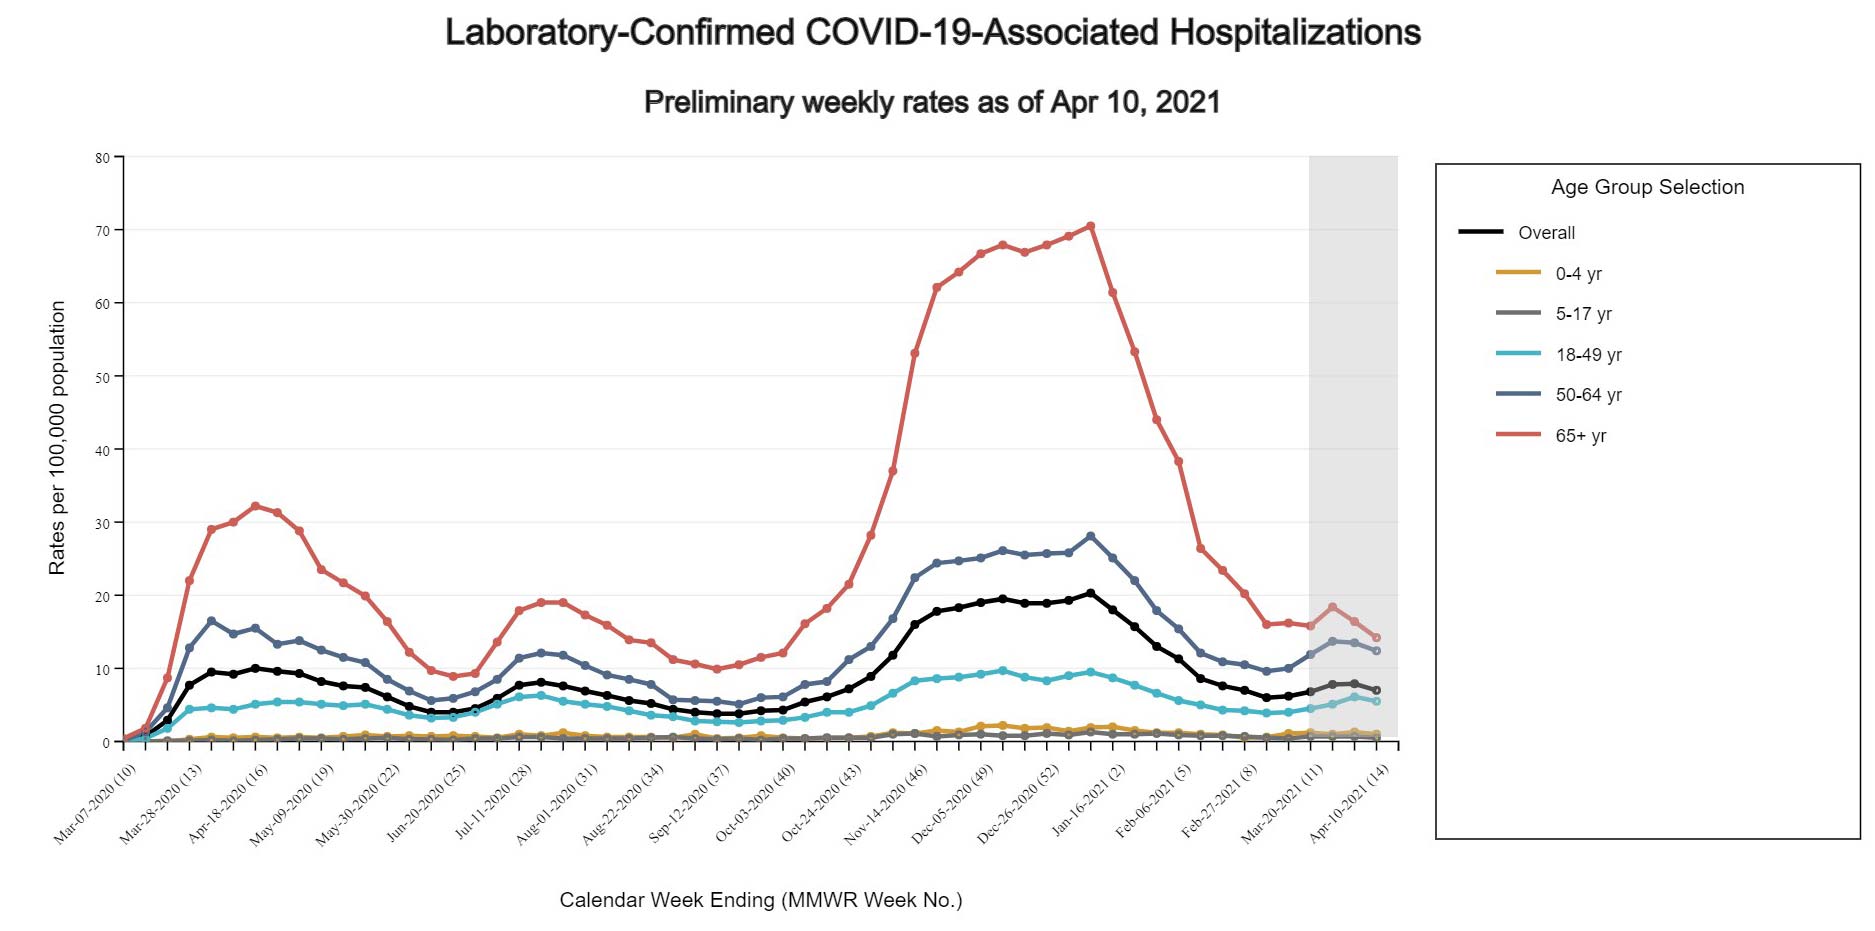 Rates of COVID-19-Associated Hospitalization by Race/Ethnicity